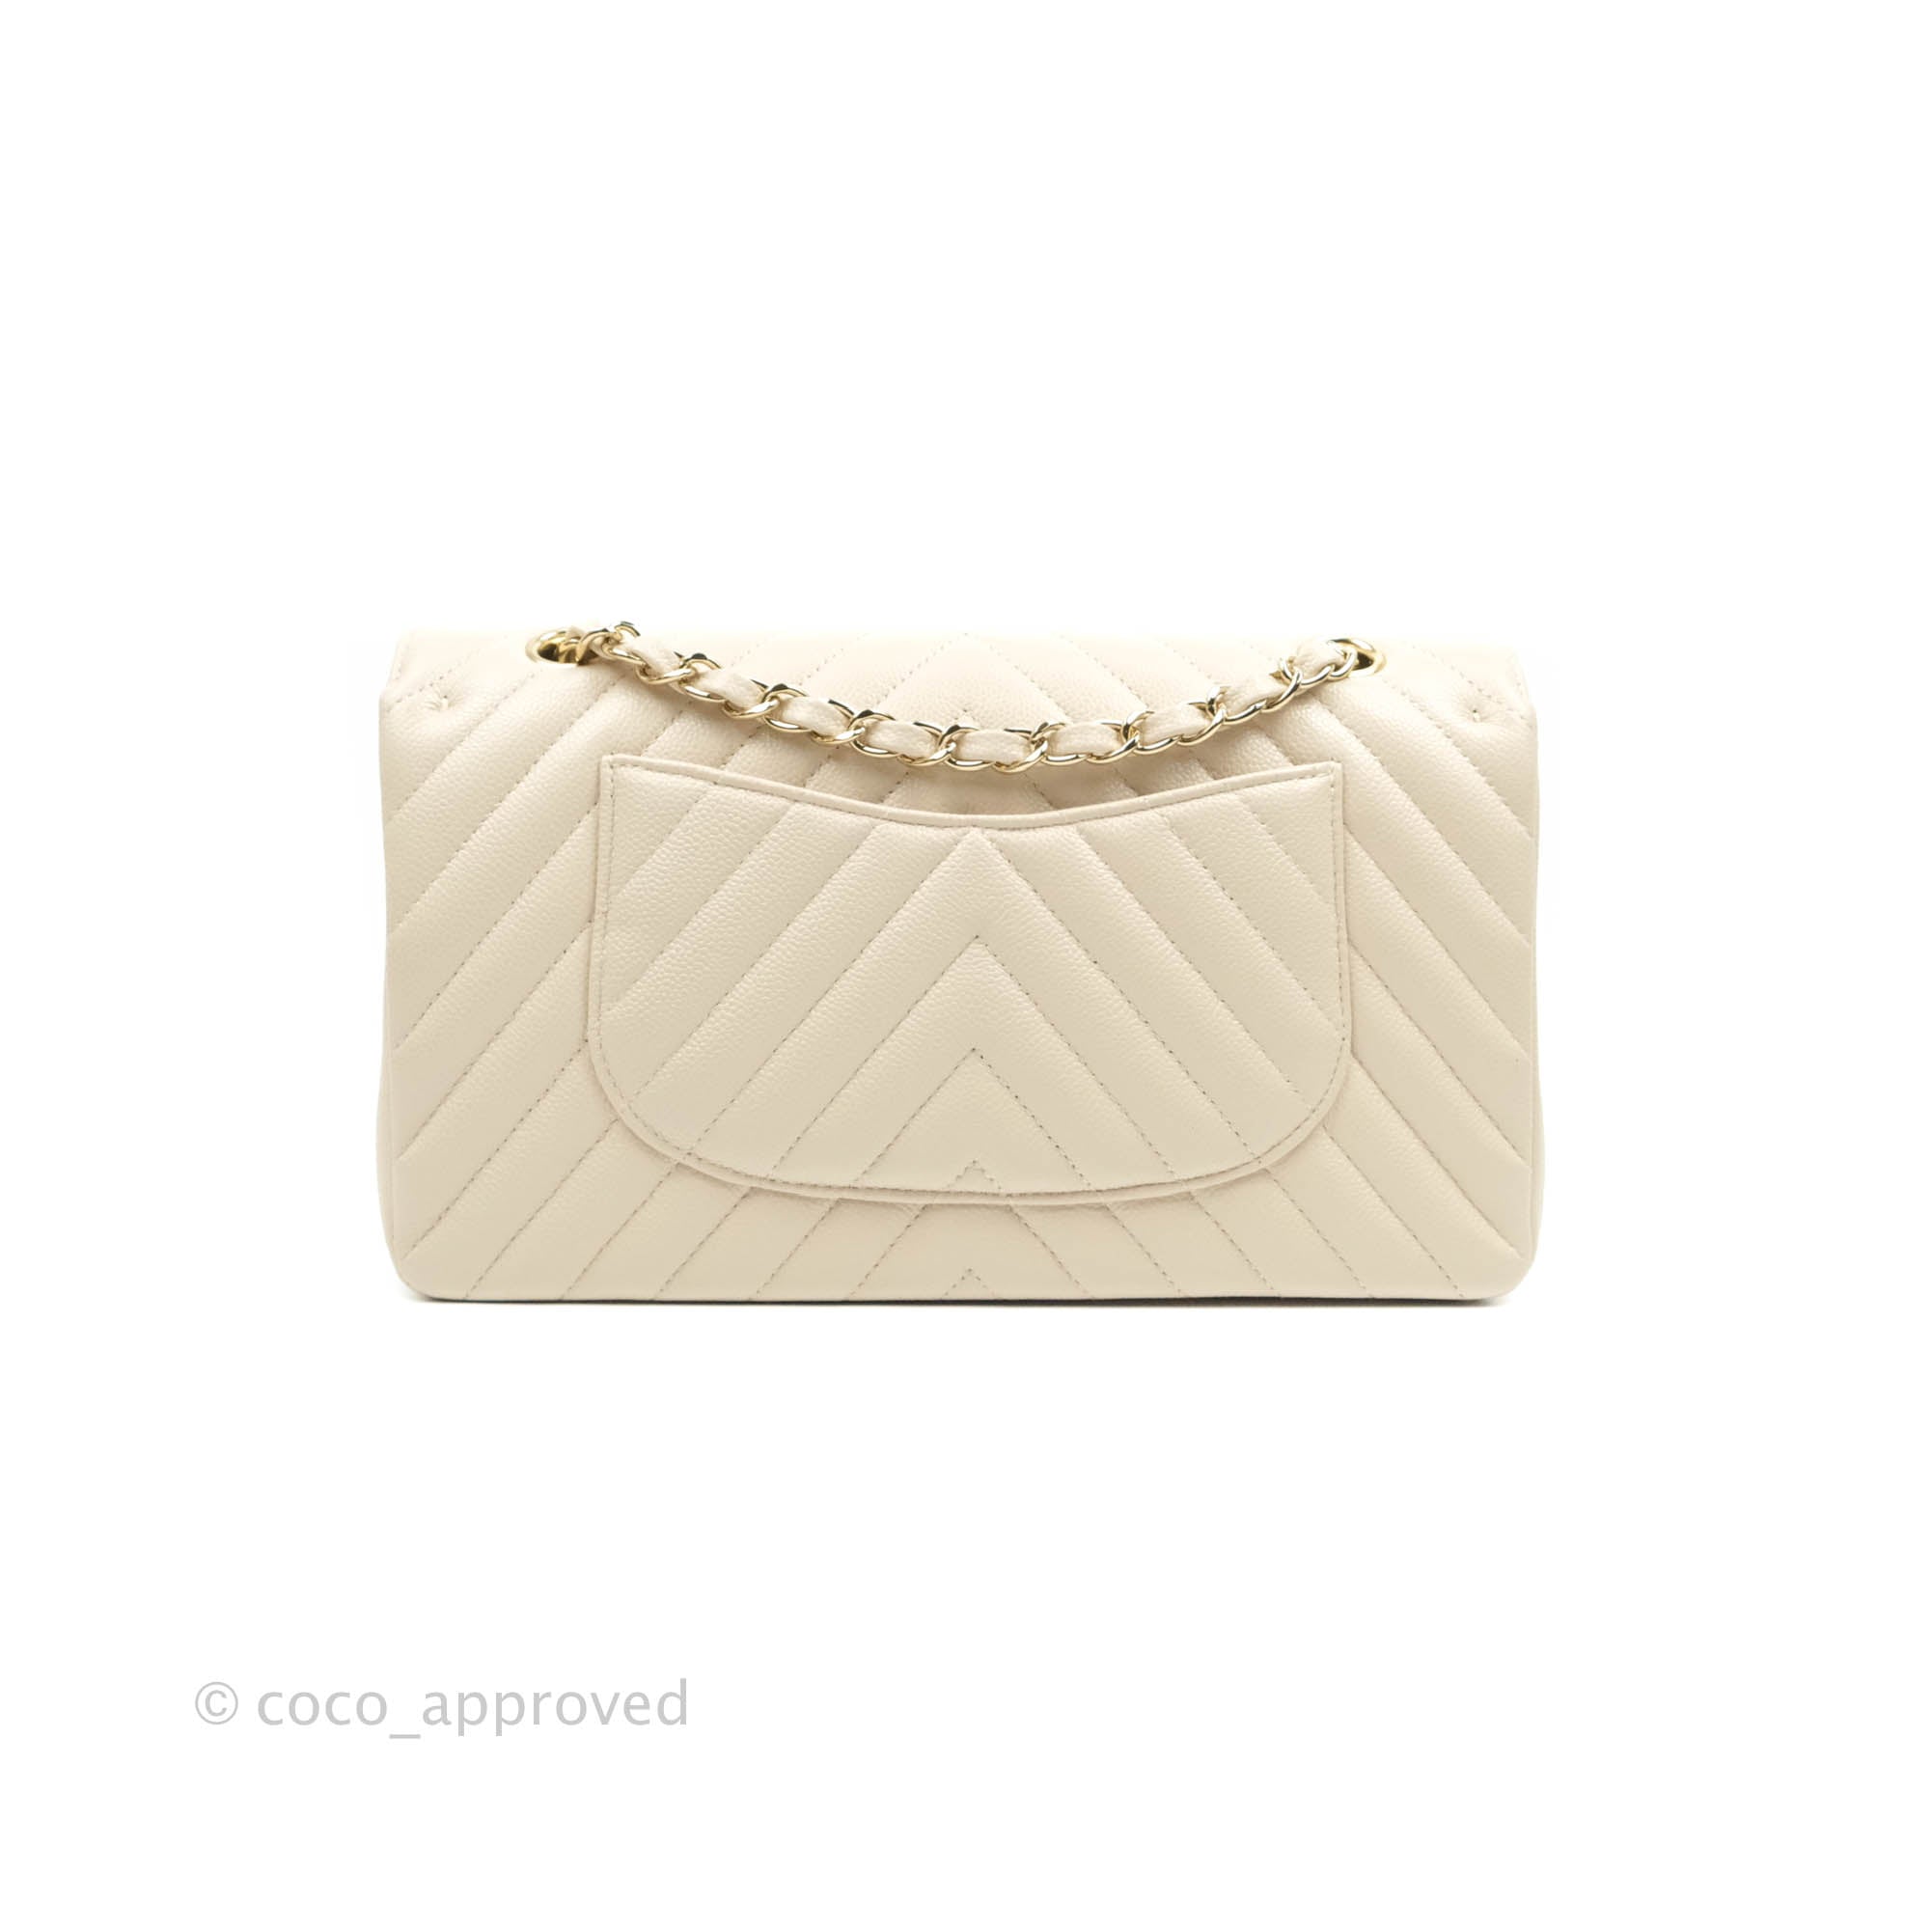 Shop authentic Chanel 2.55 Reissue 227 Double Flap Bag at revogue for just  USD 3,600.00